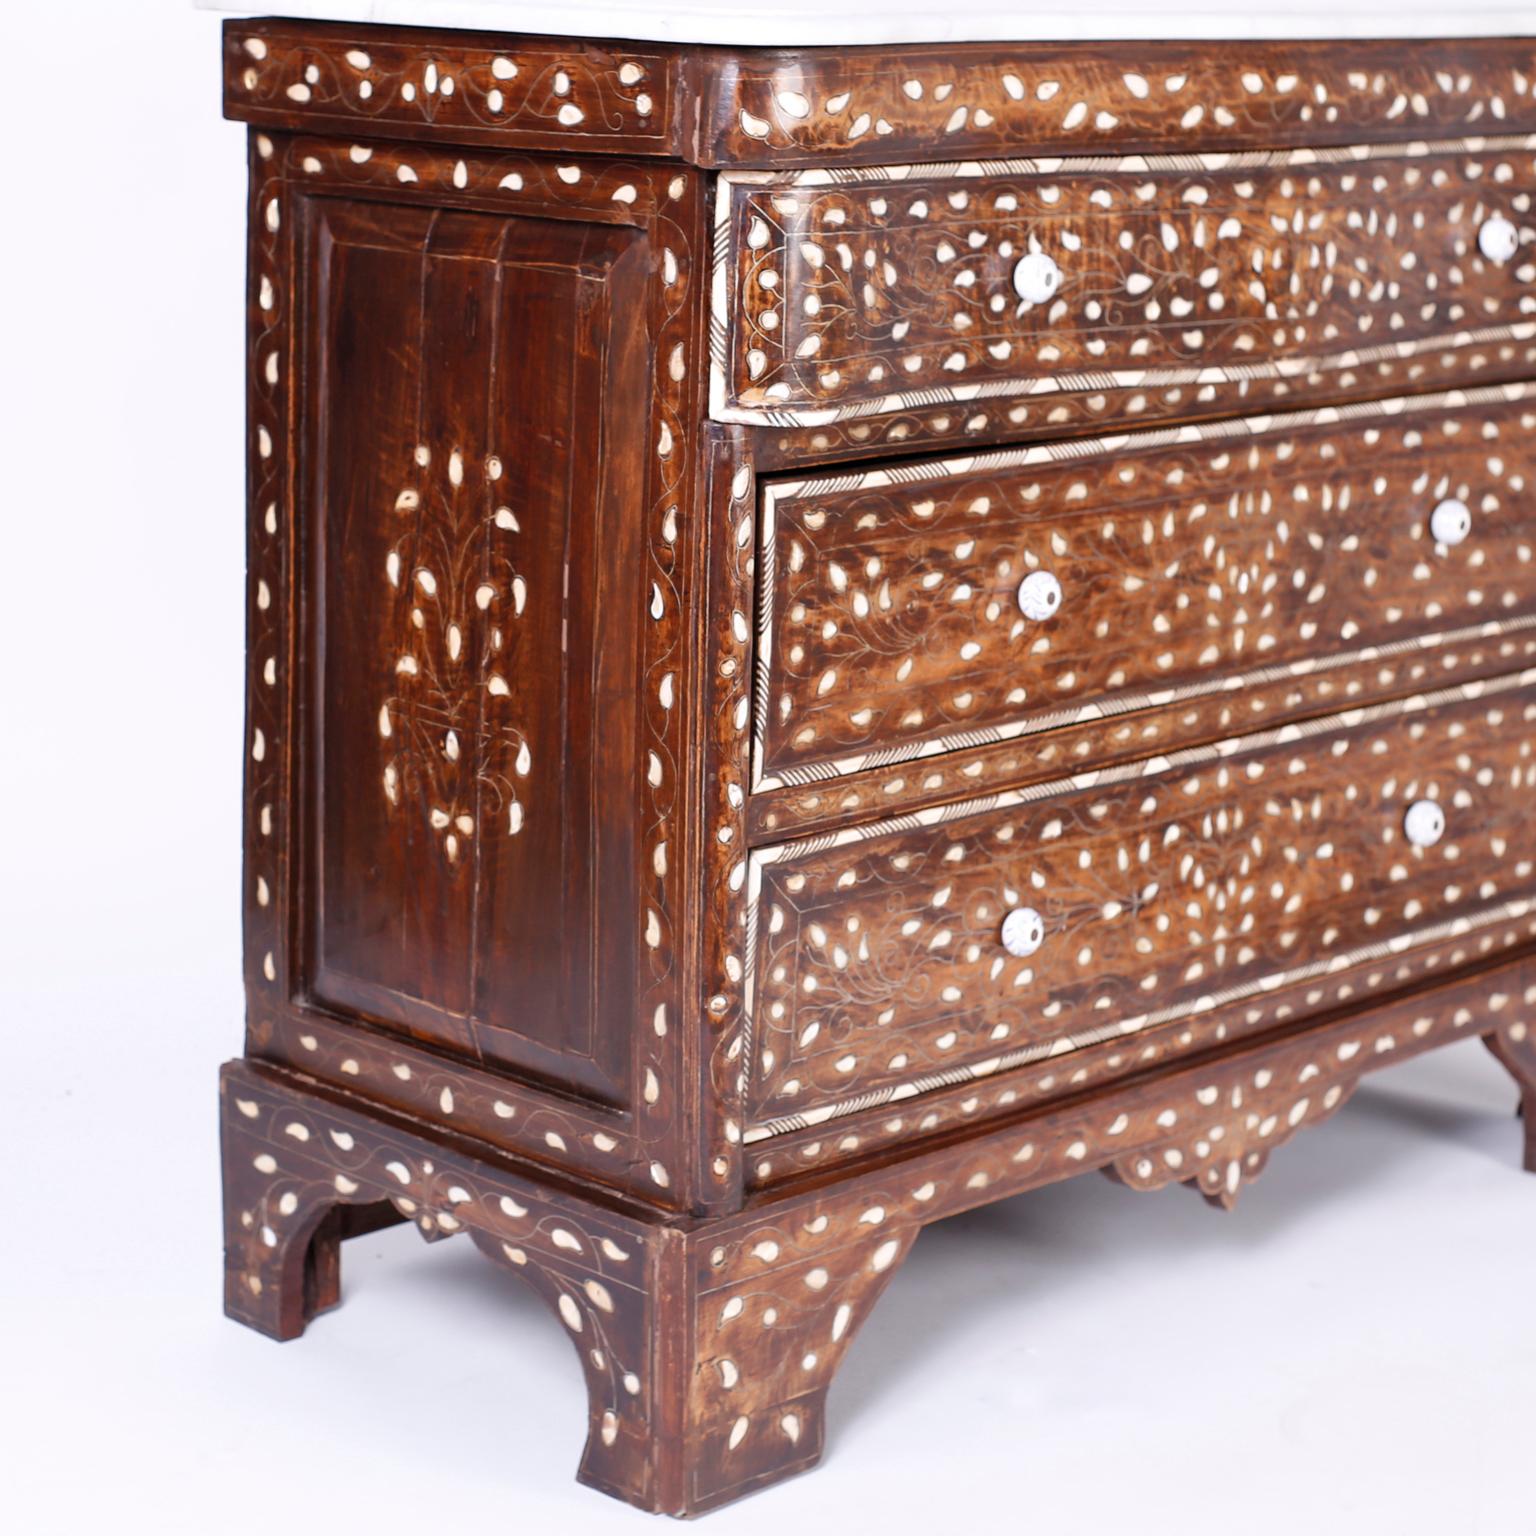 Unknown Marble Top Moorish Chest of Drawers with Inlaid Mother of Pearl